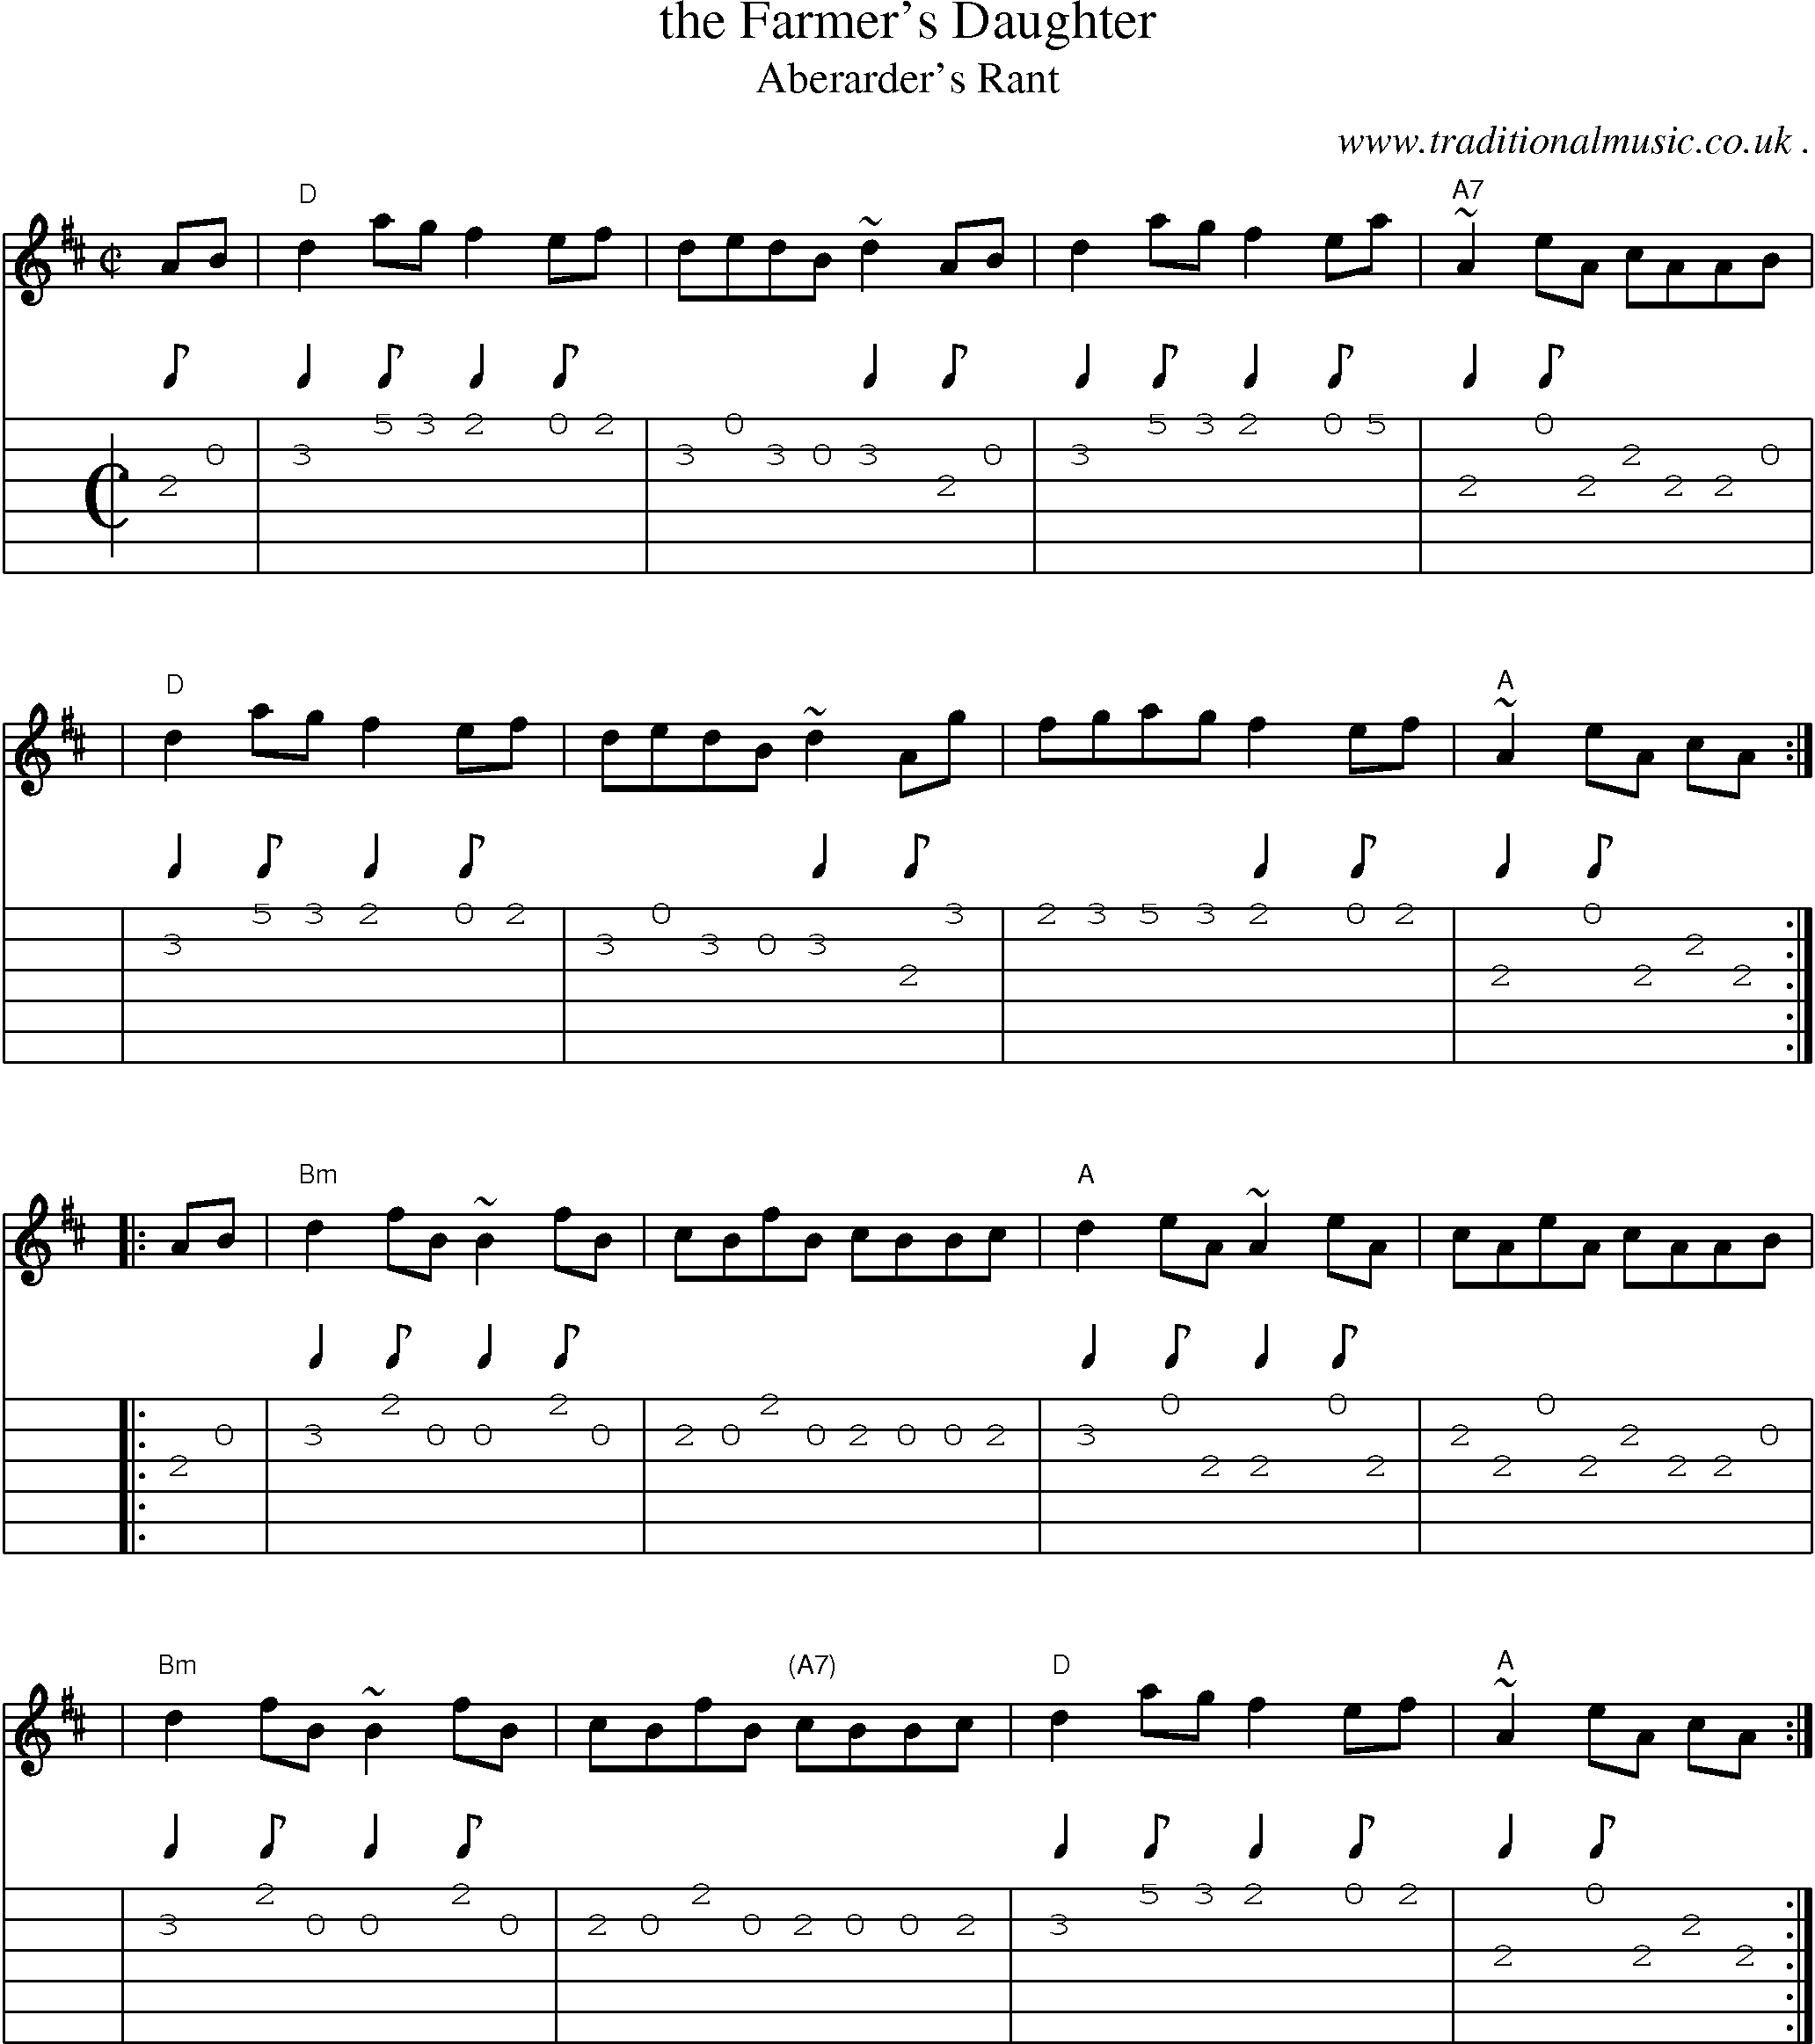 Sheet-music  score, Chords and Guitar Tabs for The Farmers Daughter